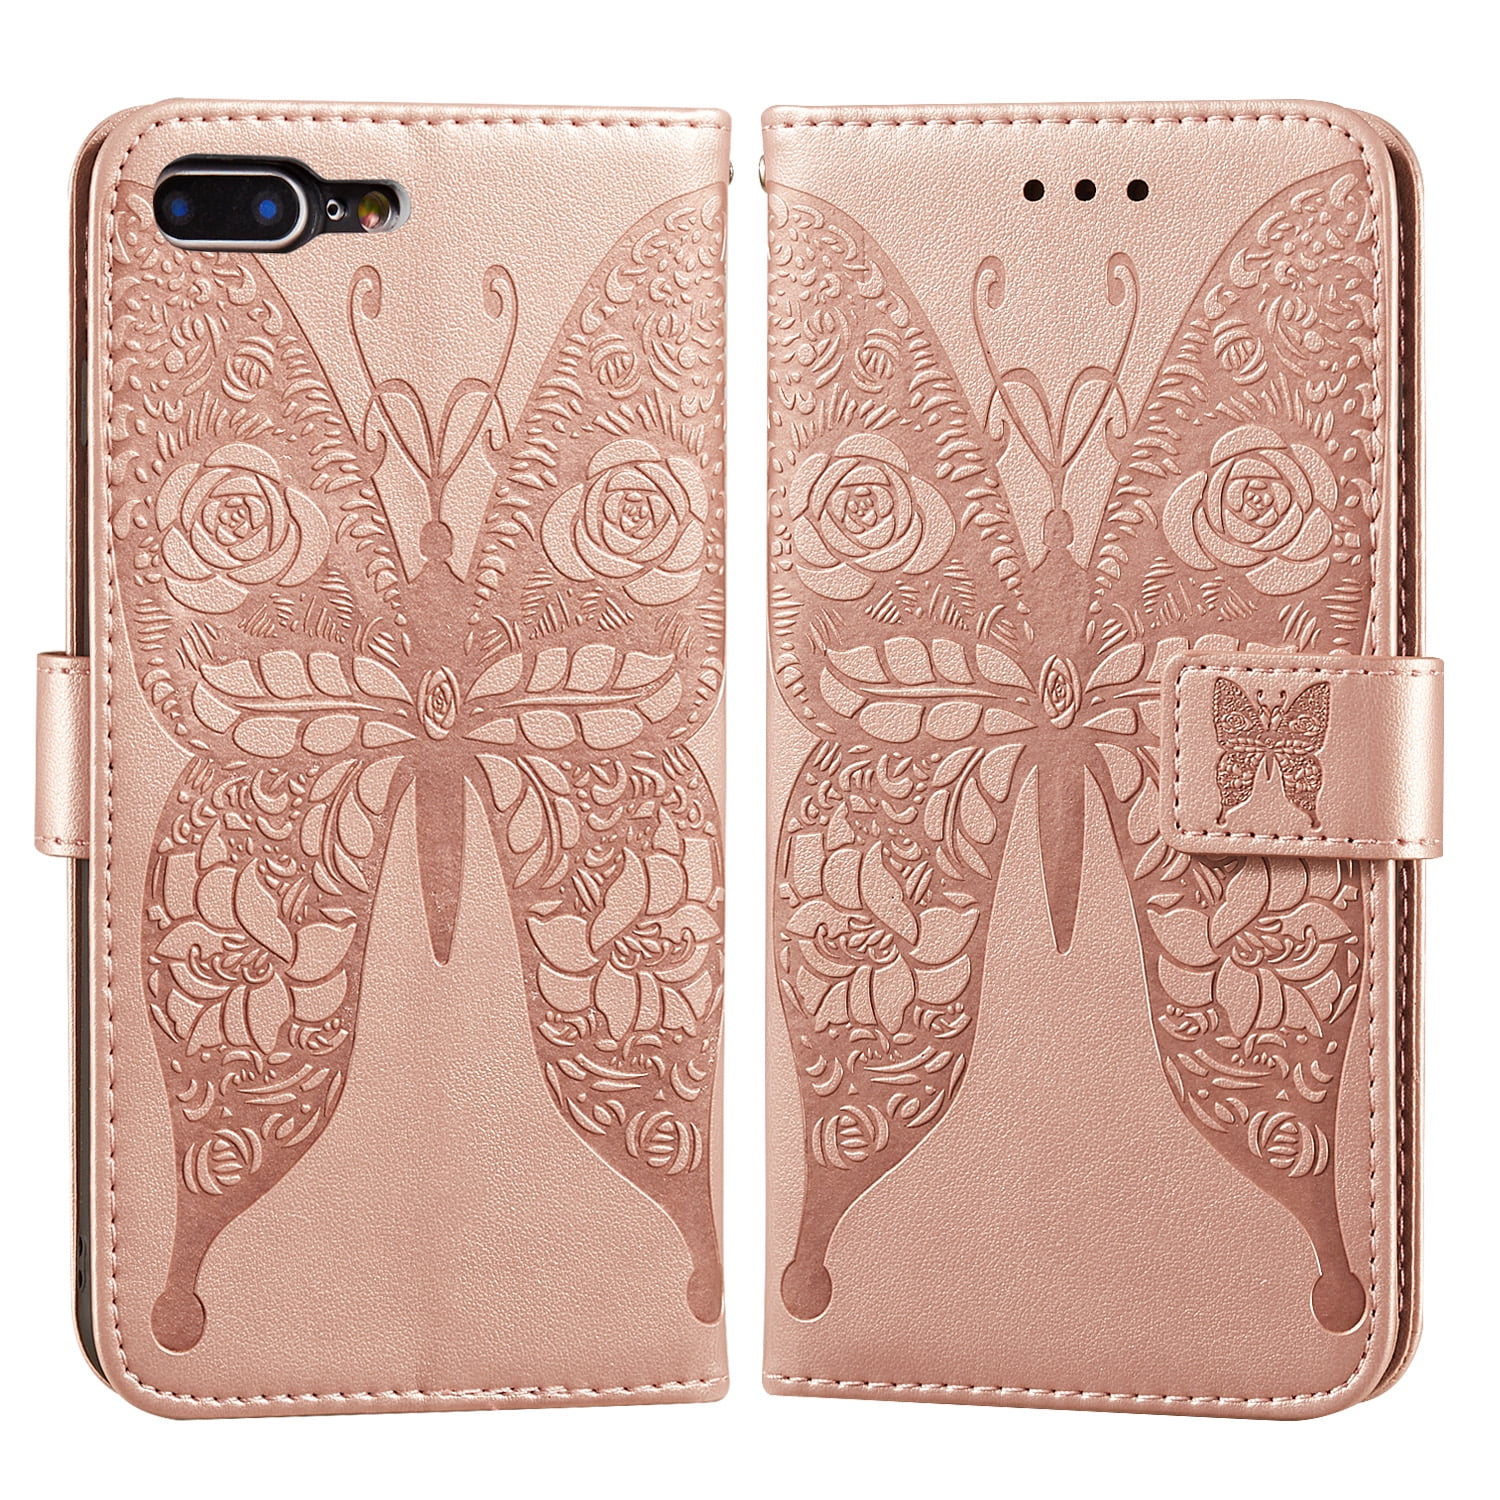 IKASEFU Compatible With iphone XS Max Case Emboss Butterfly Cute Bear Pu Leather Wallet Strap Case With Card Holder Slots Shockproof Magnetic Folio Flip Book Cover Case Green